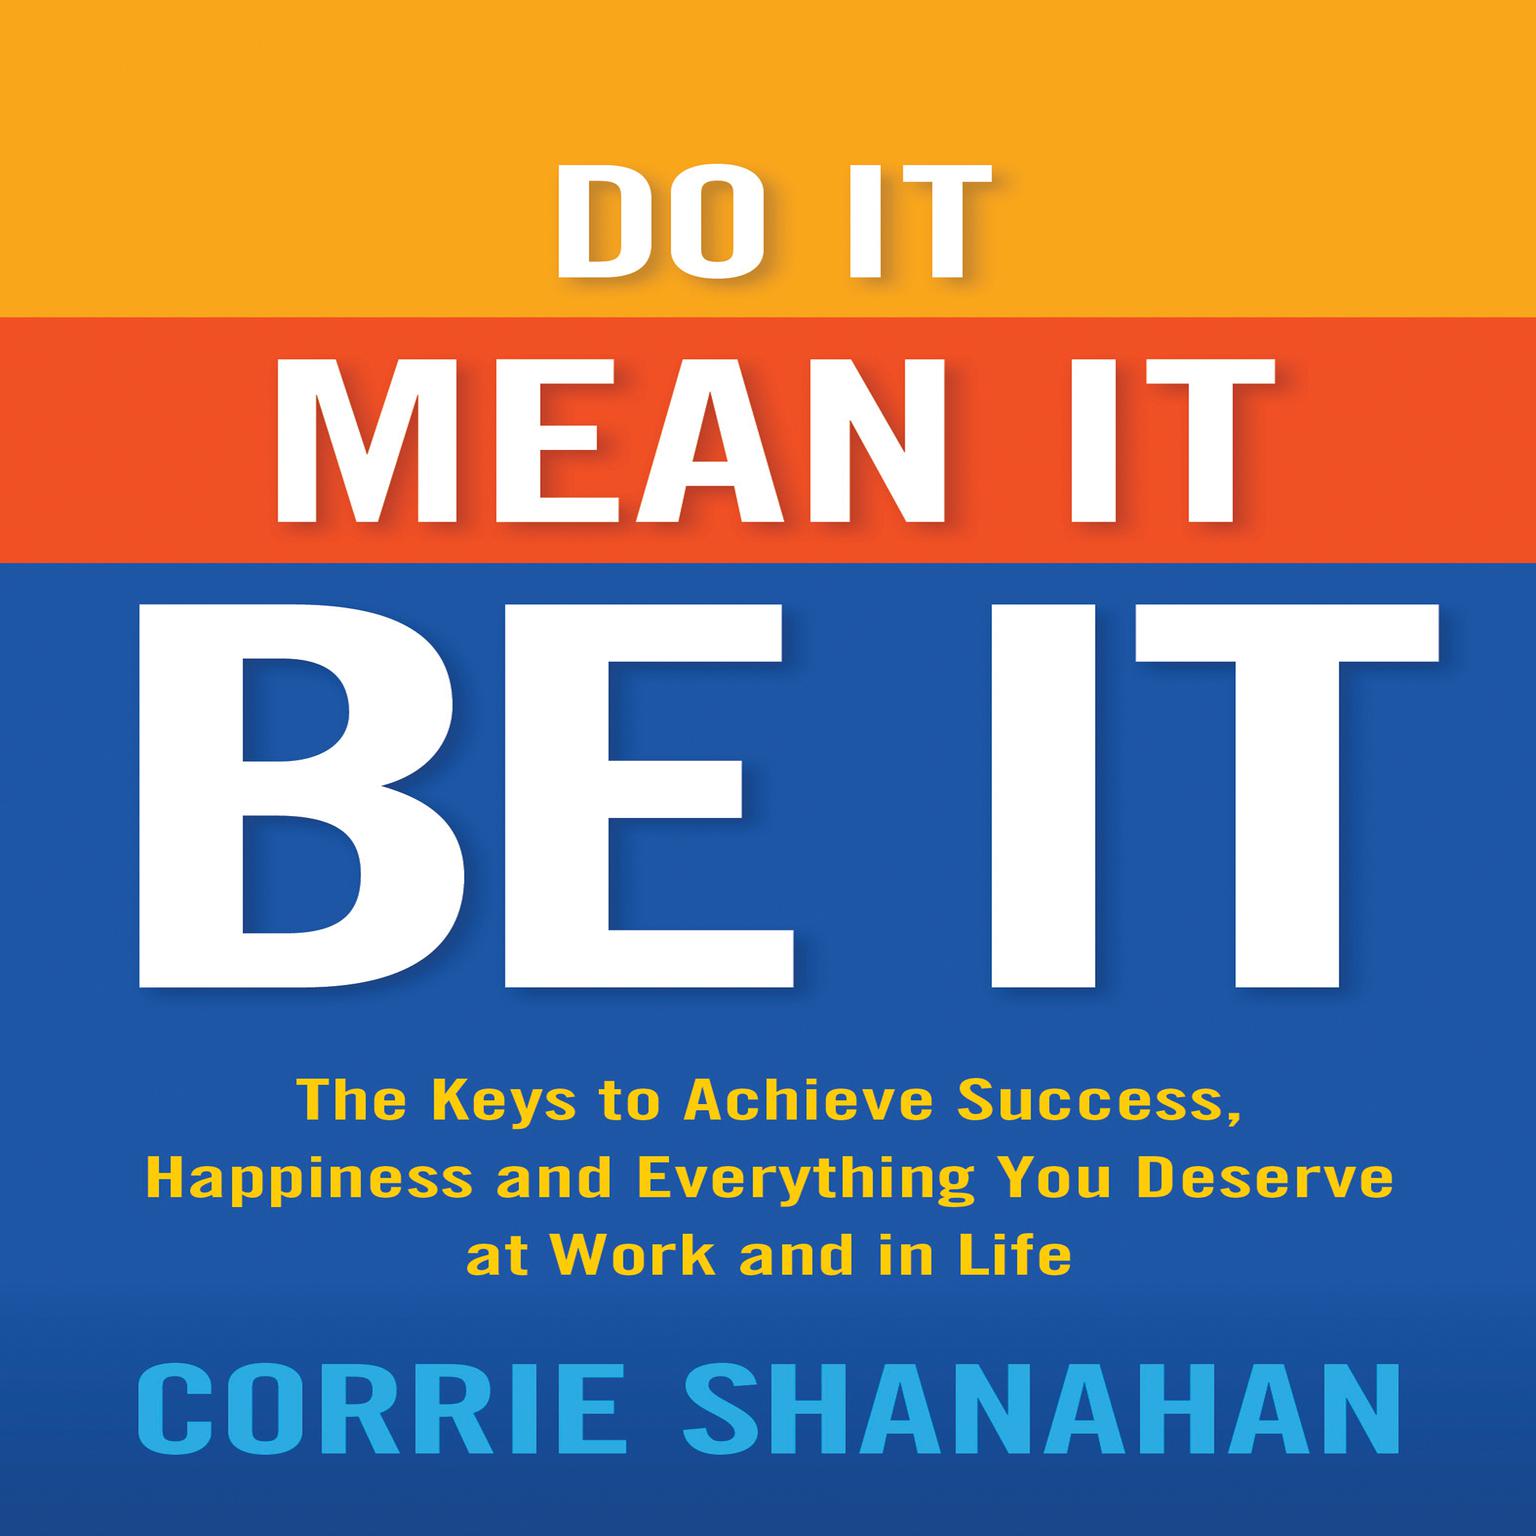 Do It, Mean It, Be It: The Keys to Achieve Success, Happiness, and Everything You Deserve at Work and in Life Audiobook, by Corrie Shanahan